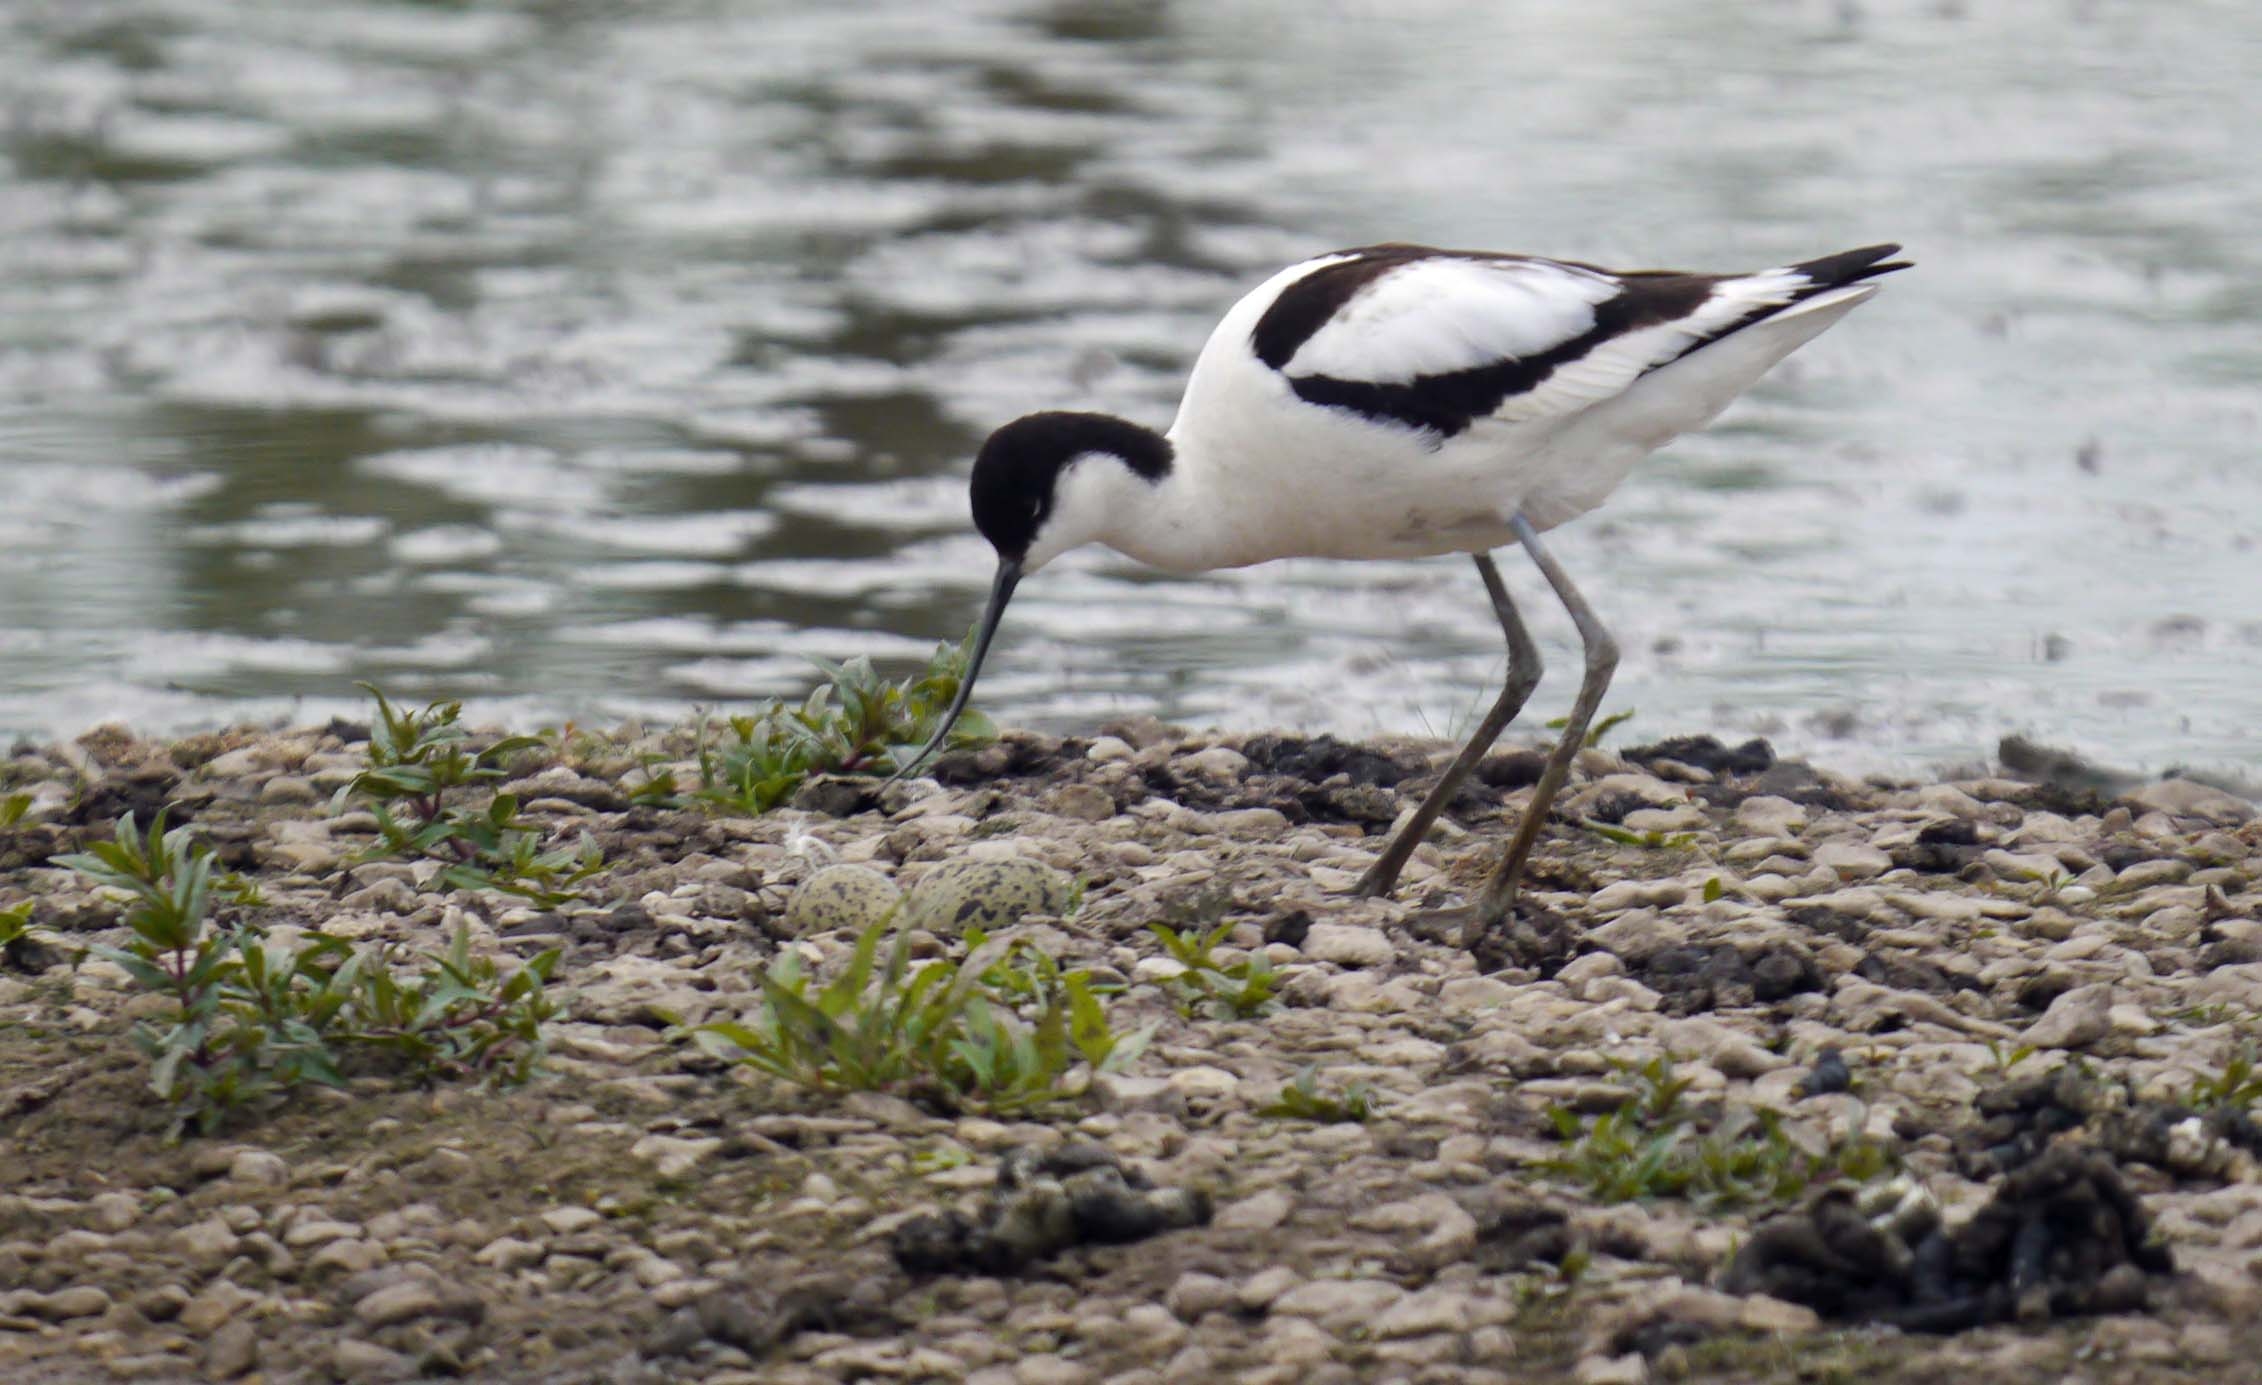 Avocets keep trying